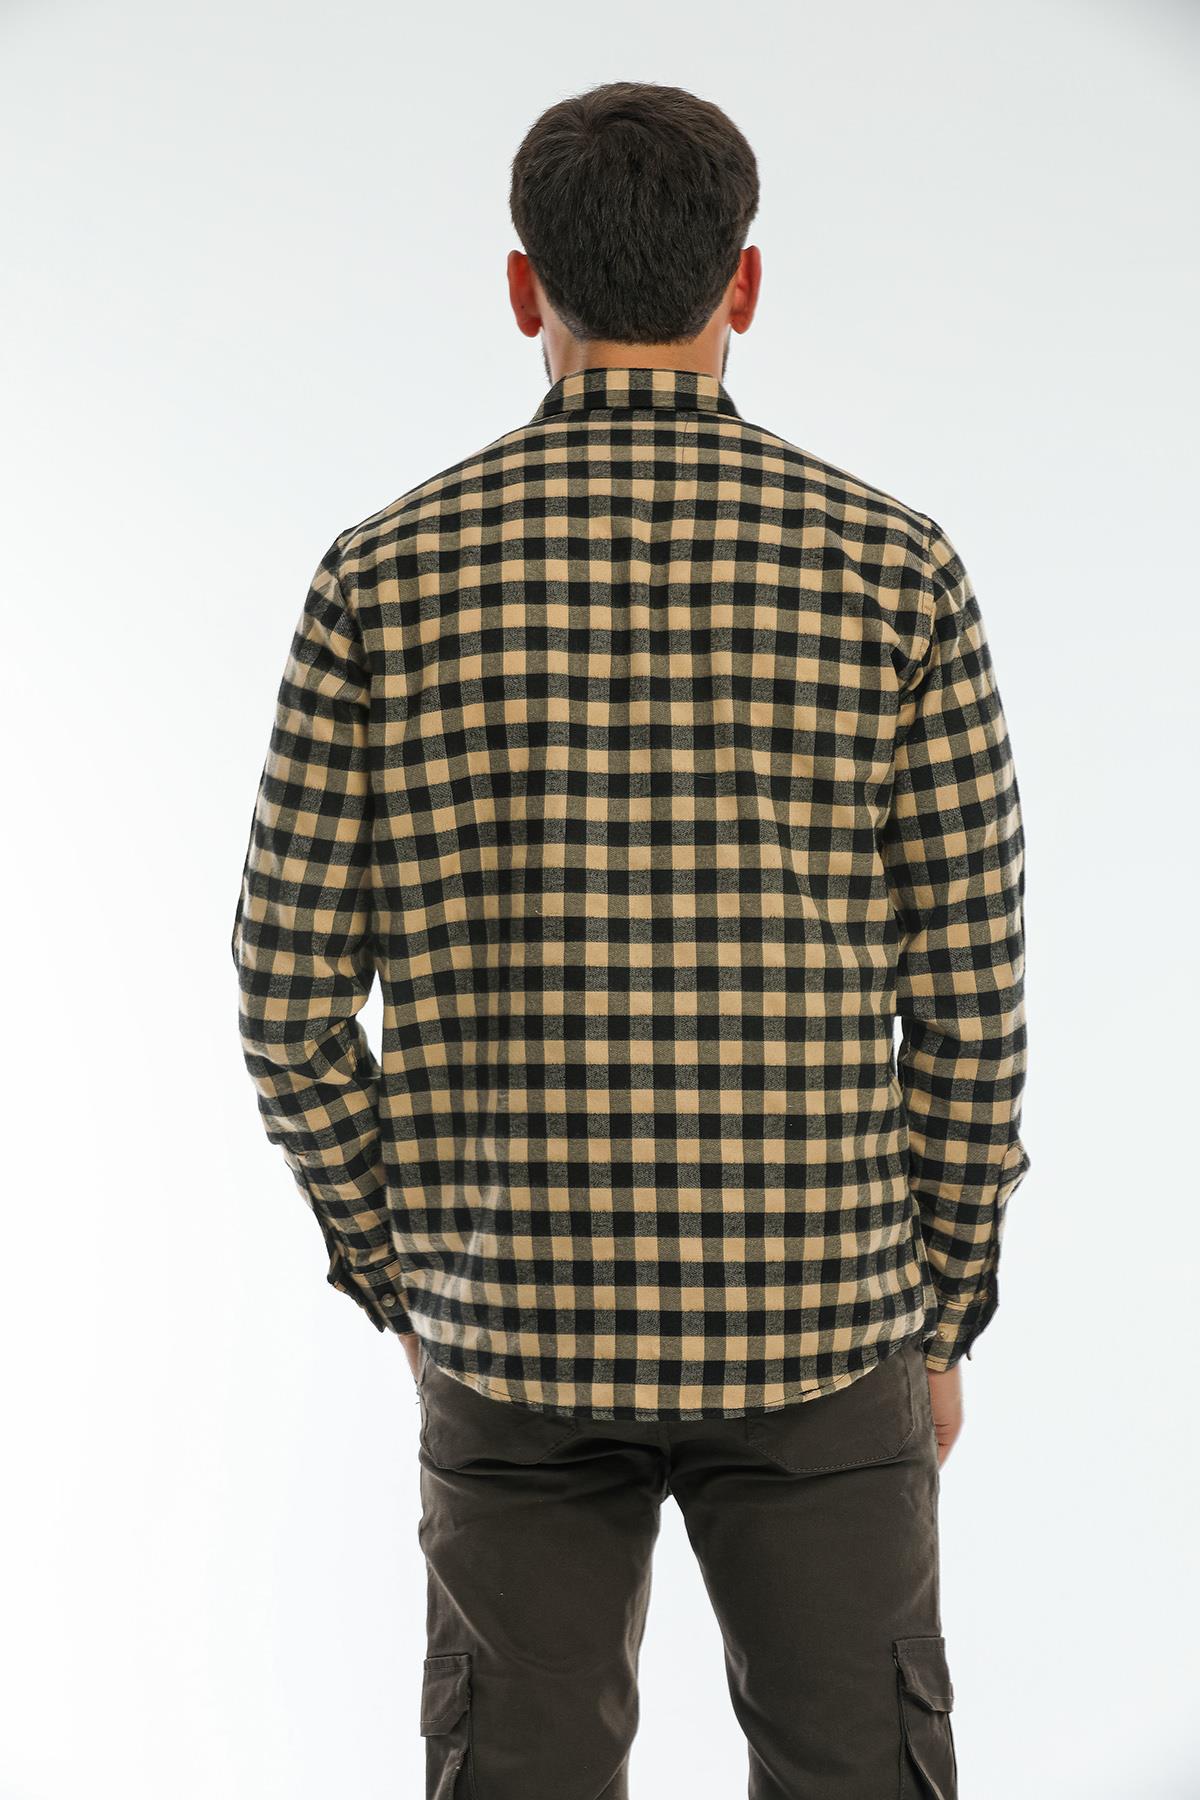 Back buttoned Fland with Flash Pockets without Pockets Men's Shirt